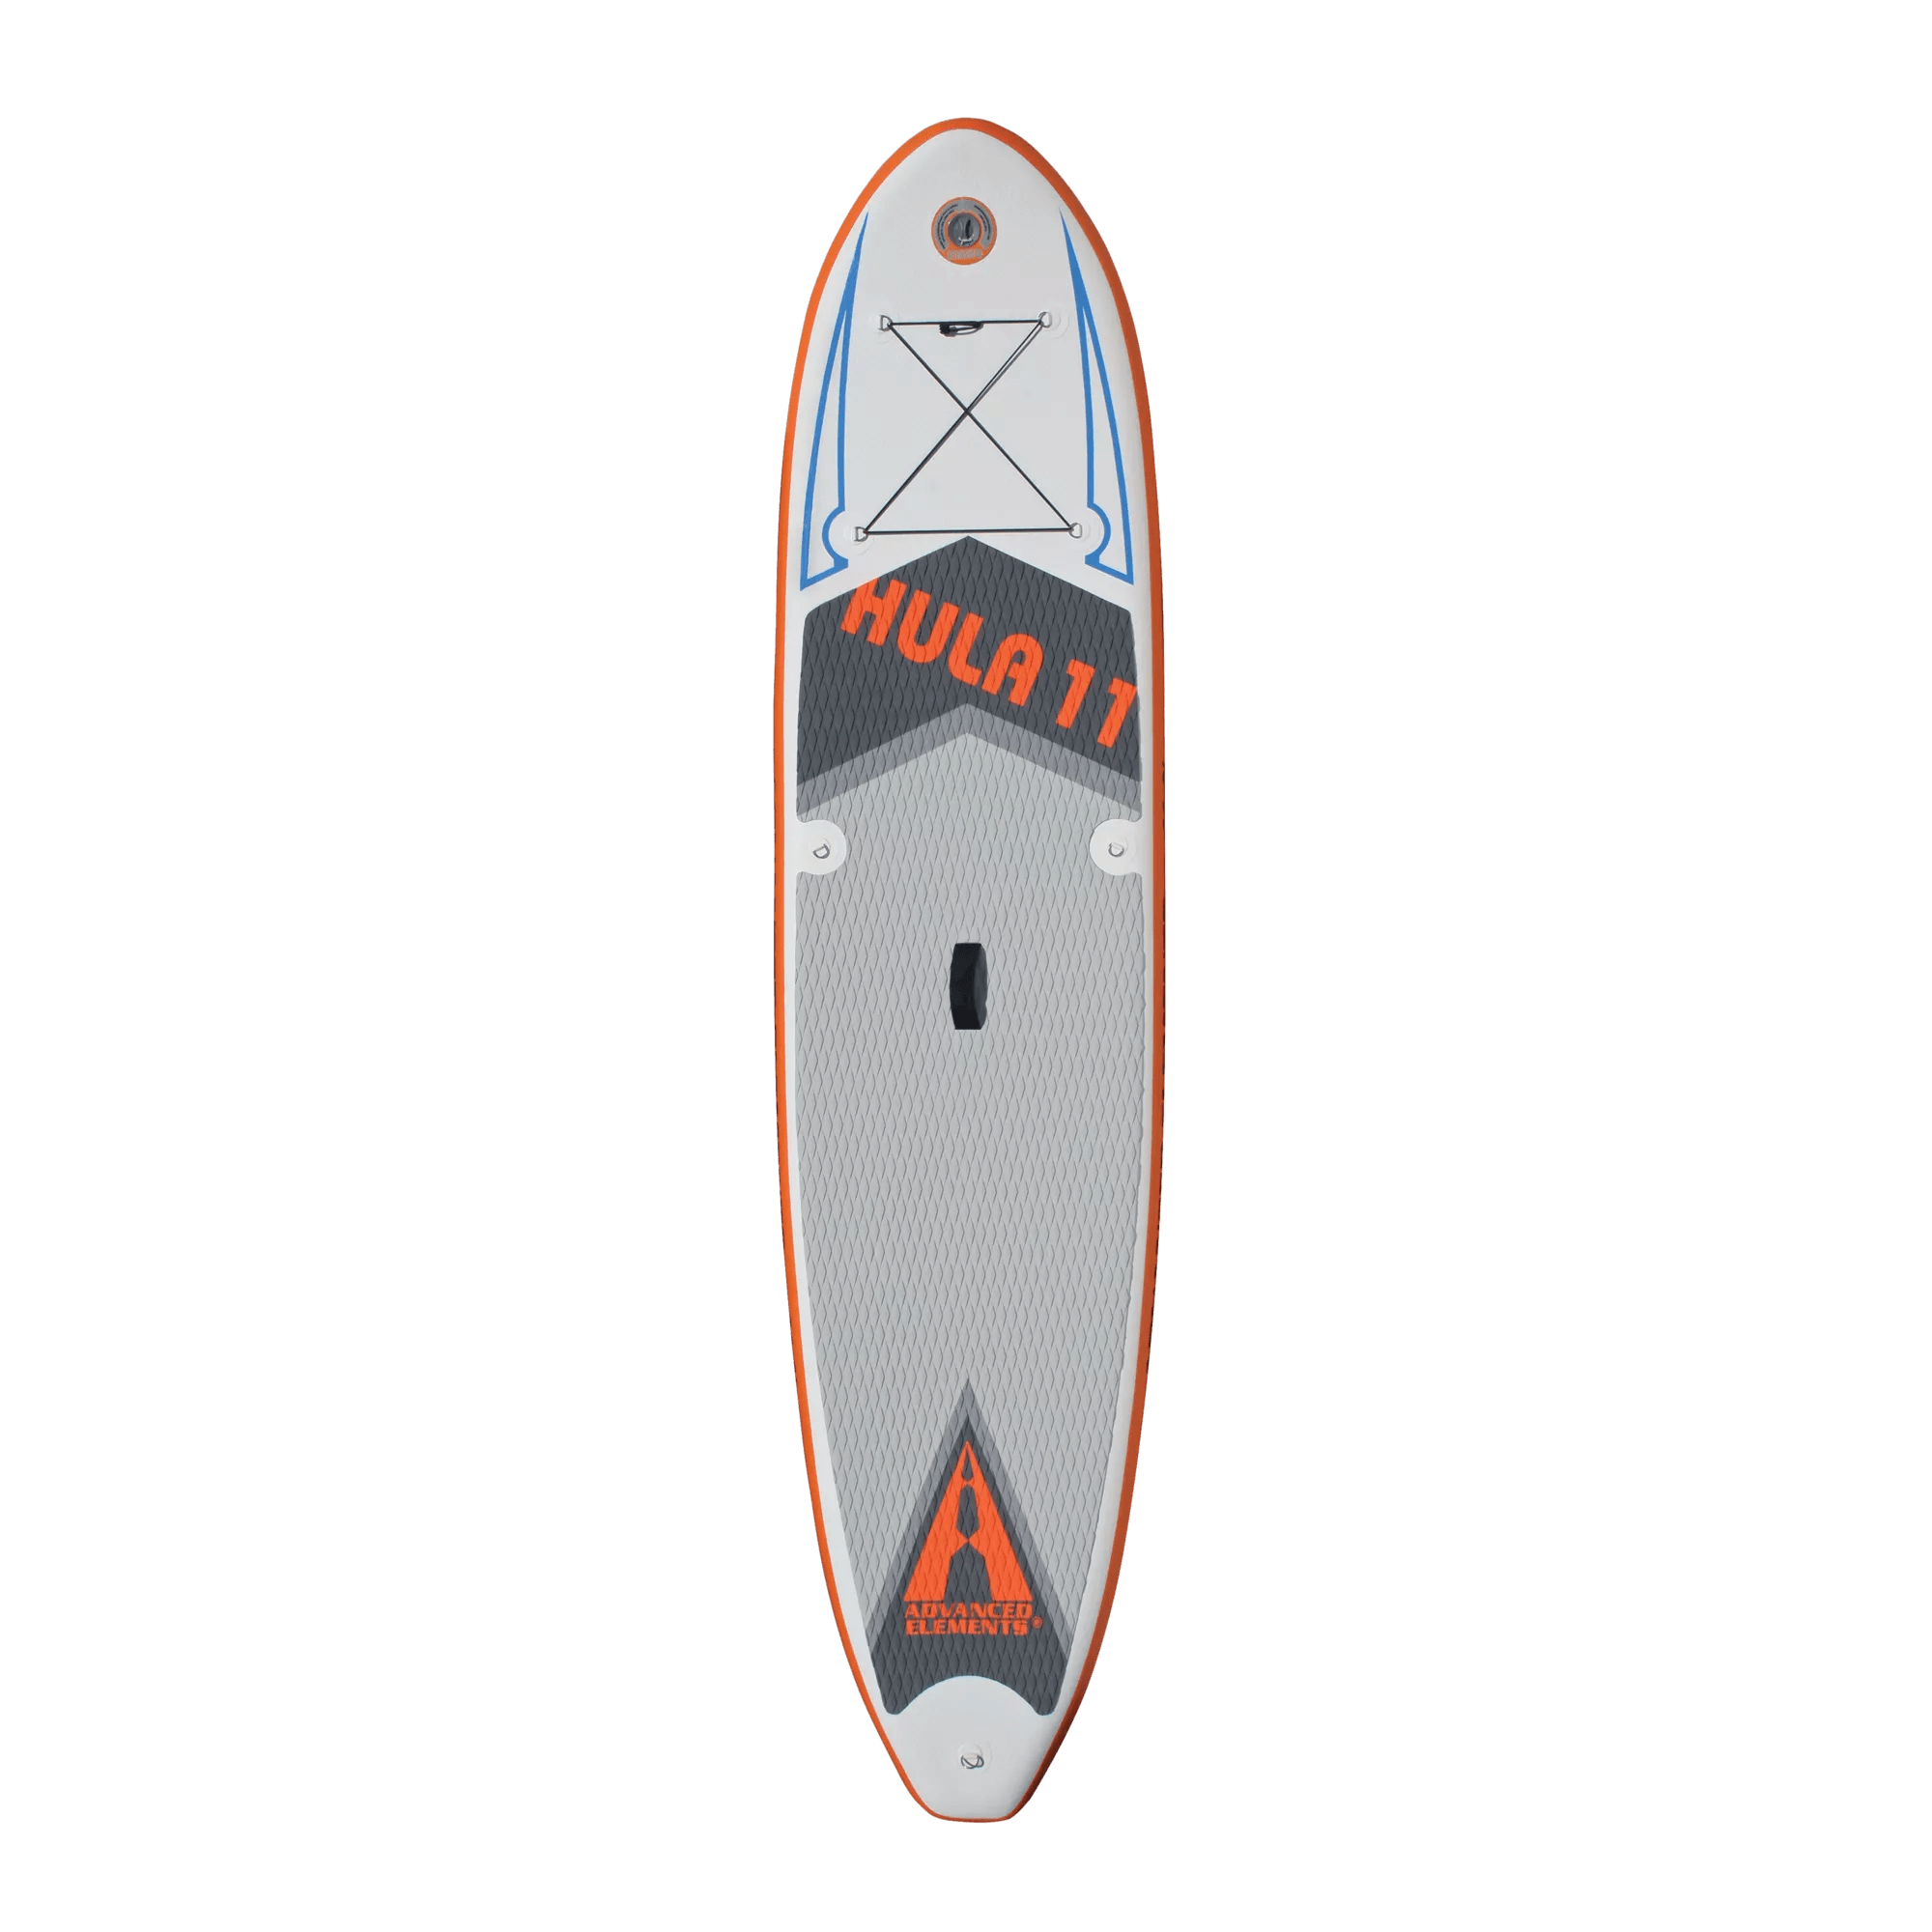 ADVANCED ELEMENTS - Hula 11 Inflatable Stand Up Paddle Board -  - AE1010-O - 